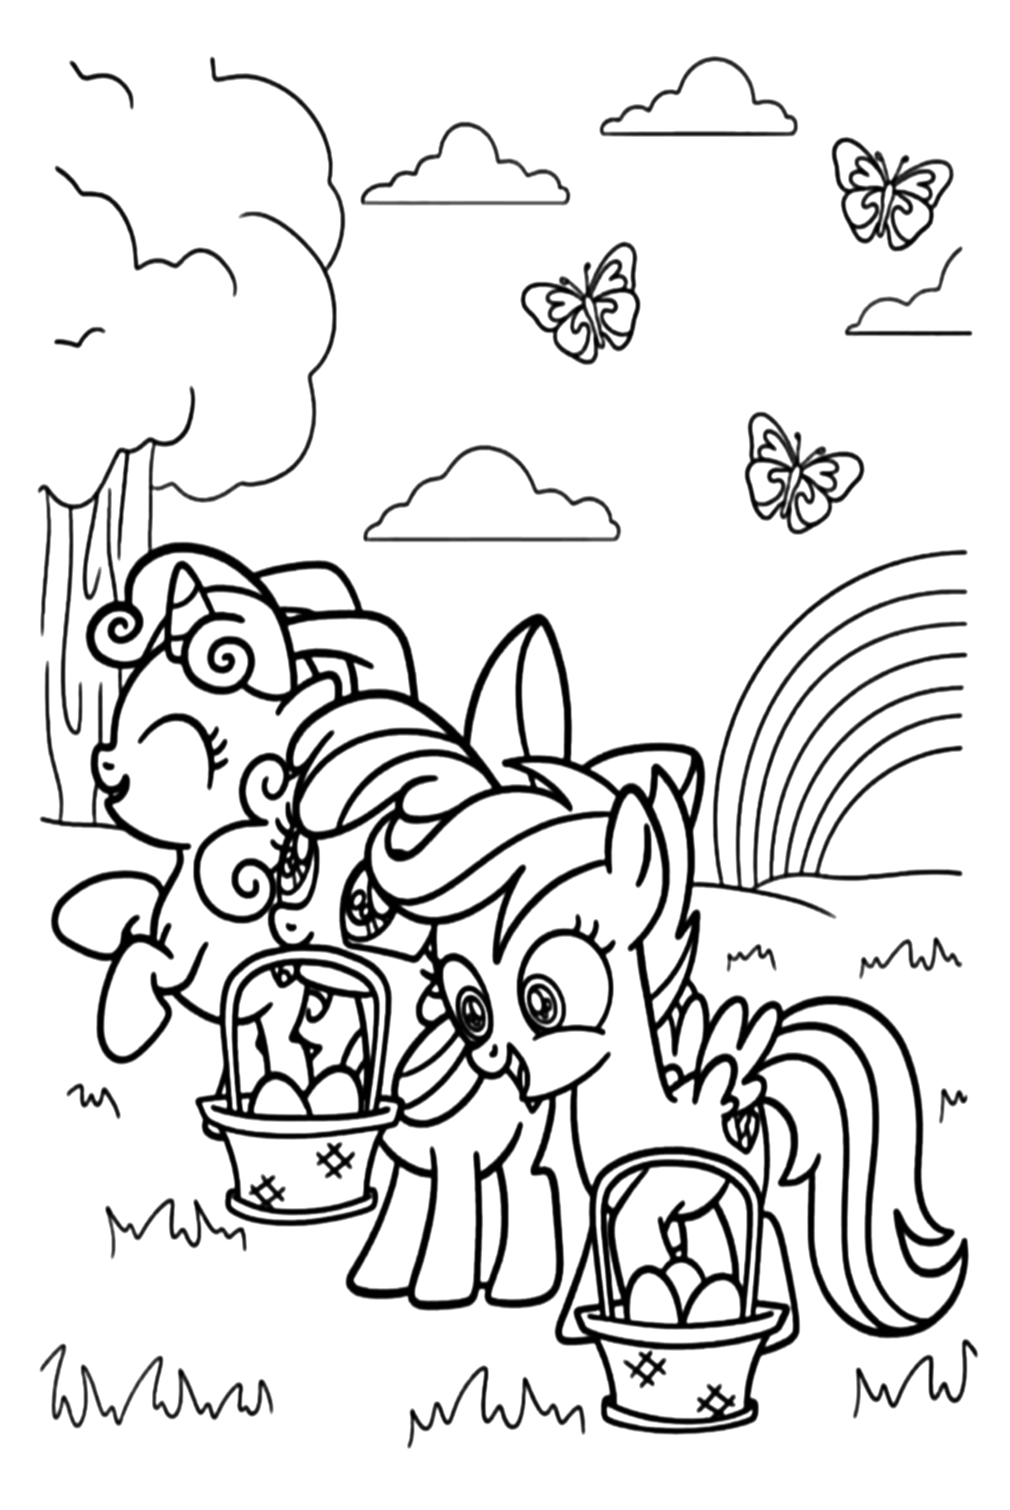 My Little Pony Applejack Coloring Page